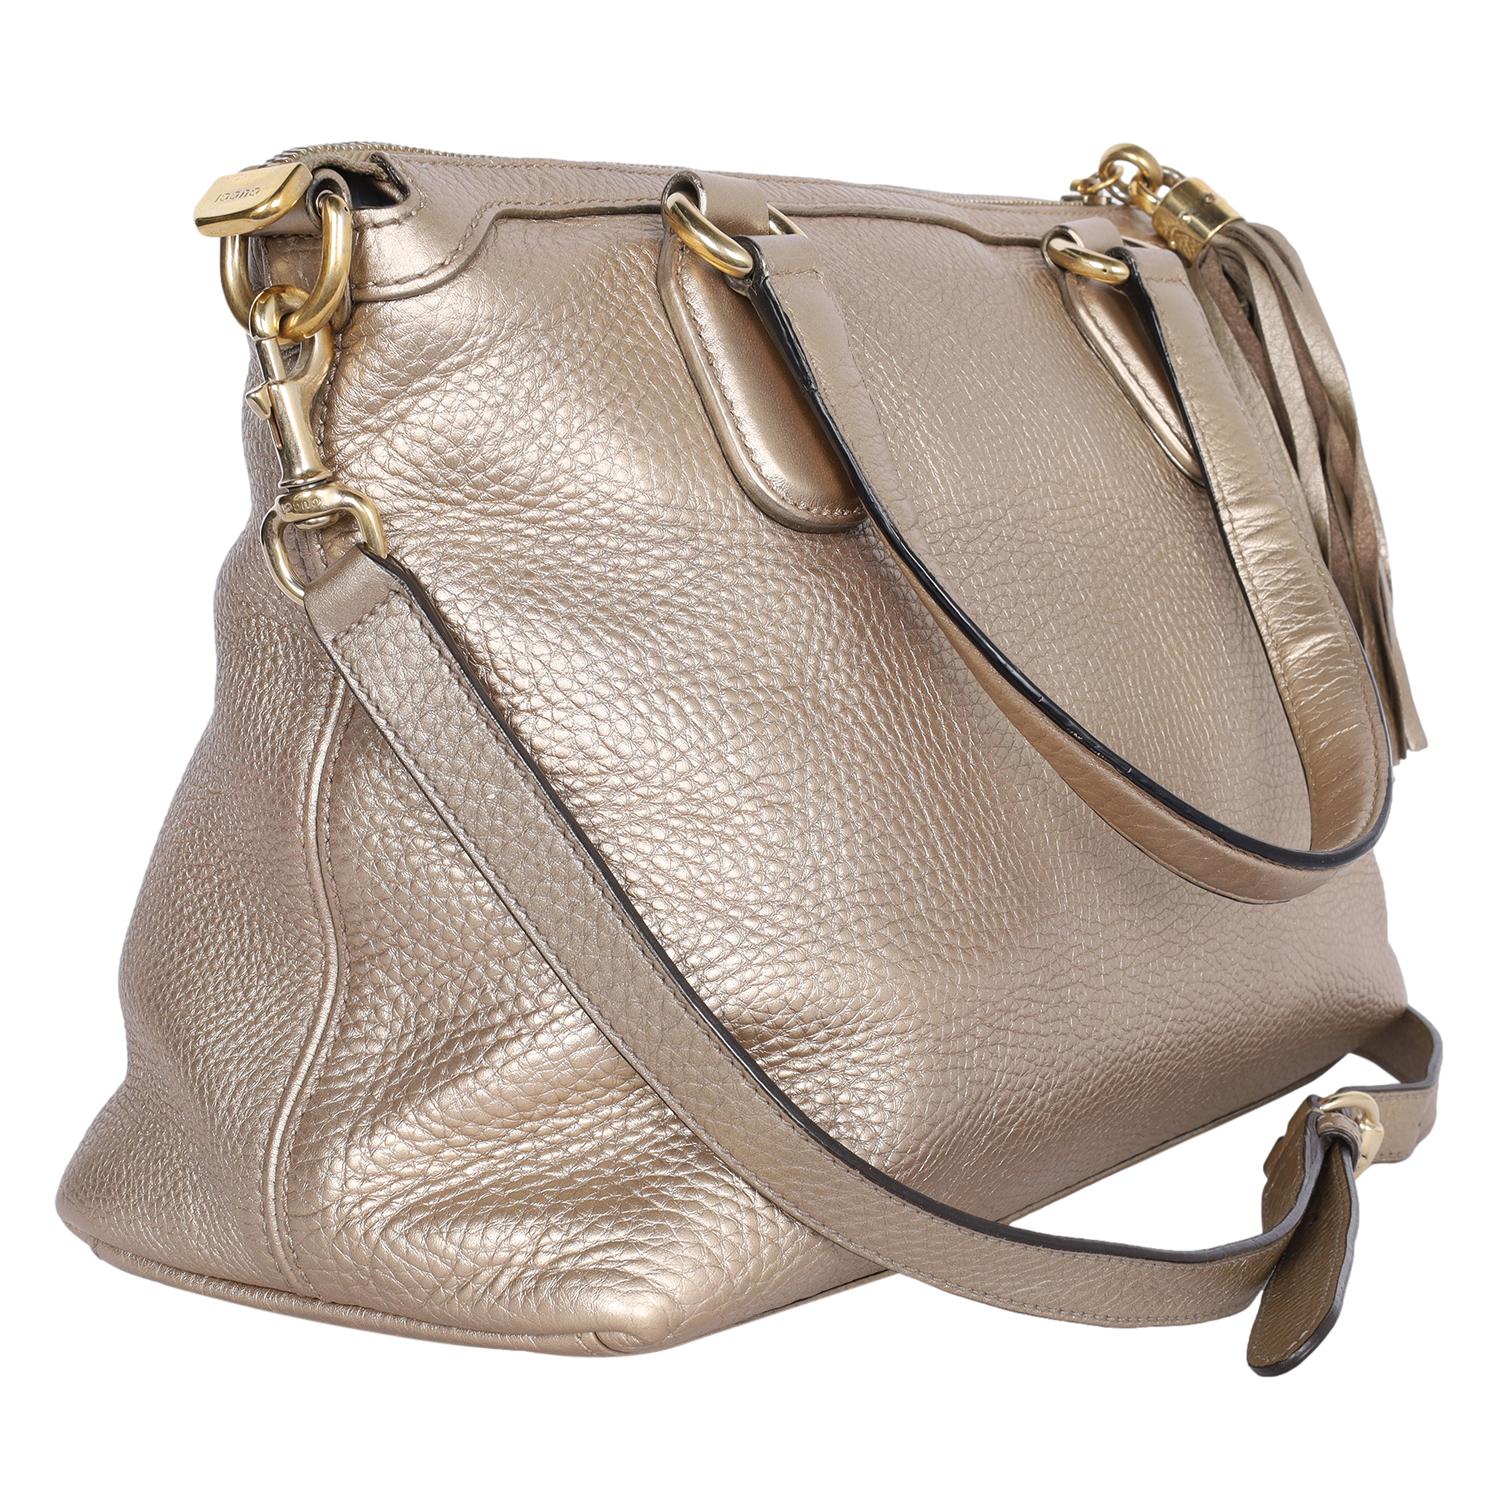 Gucci Soho Metallic Gold Pebbled Calfskin Leather Top Handle Bag For Sale 3